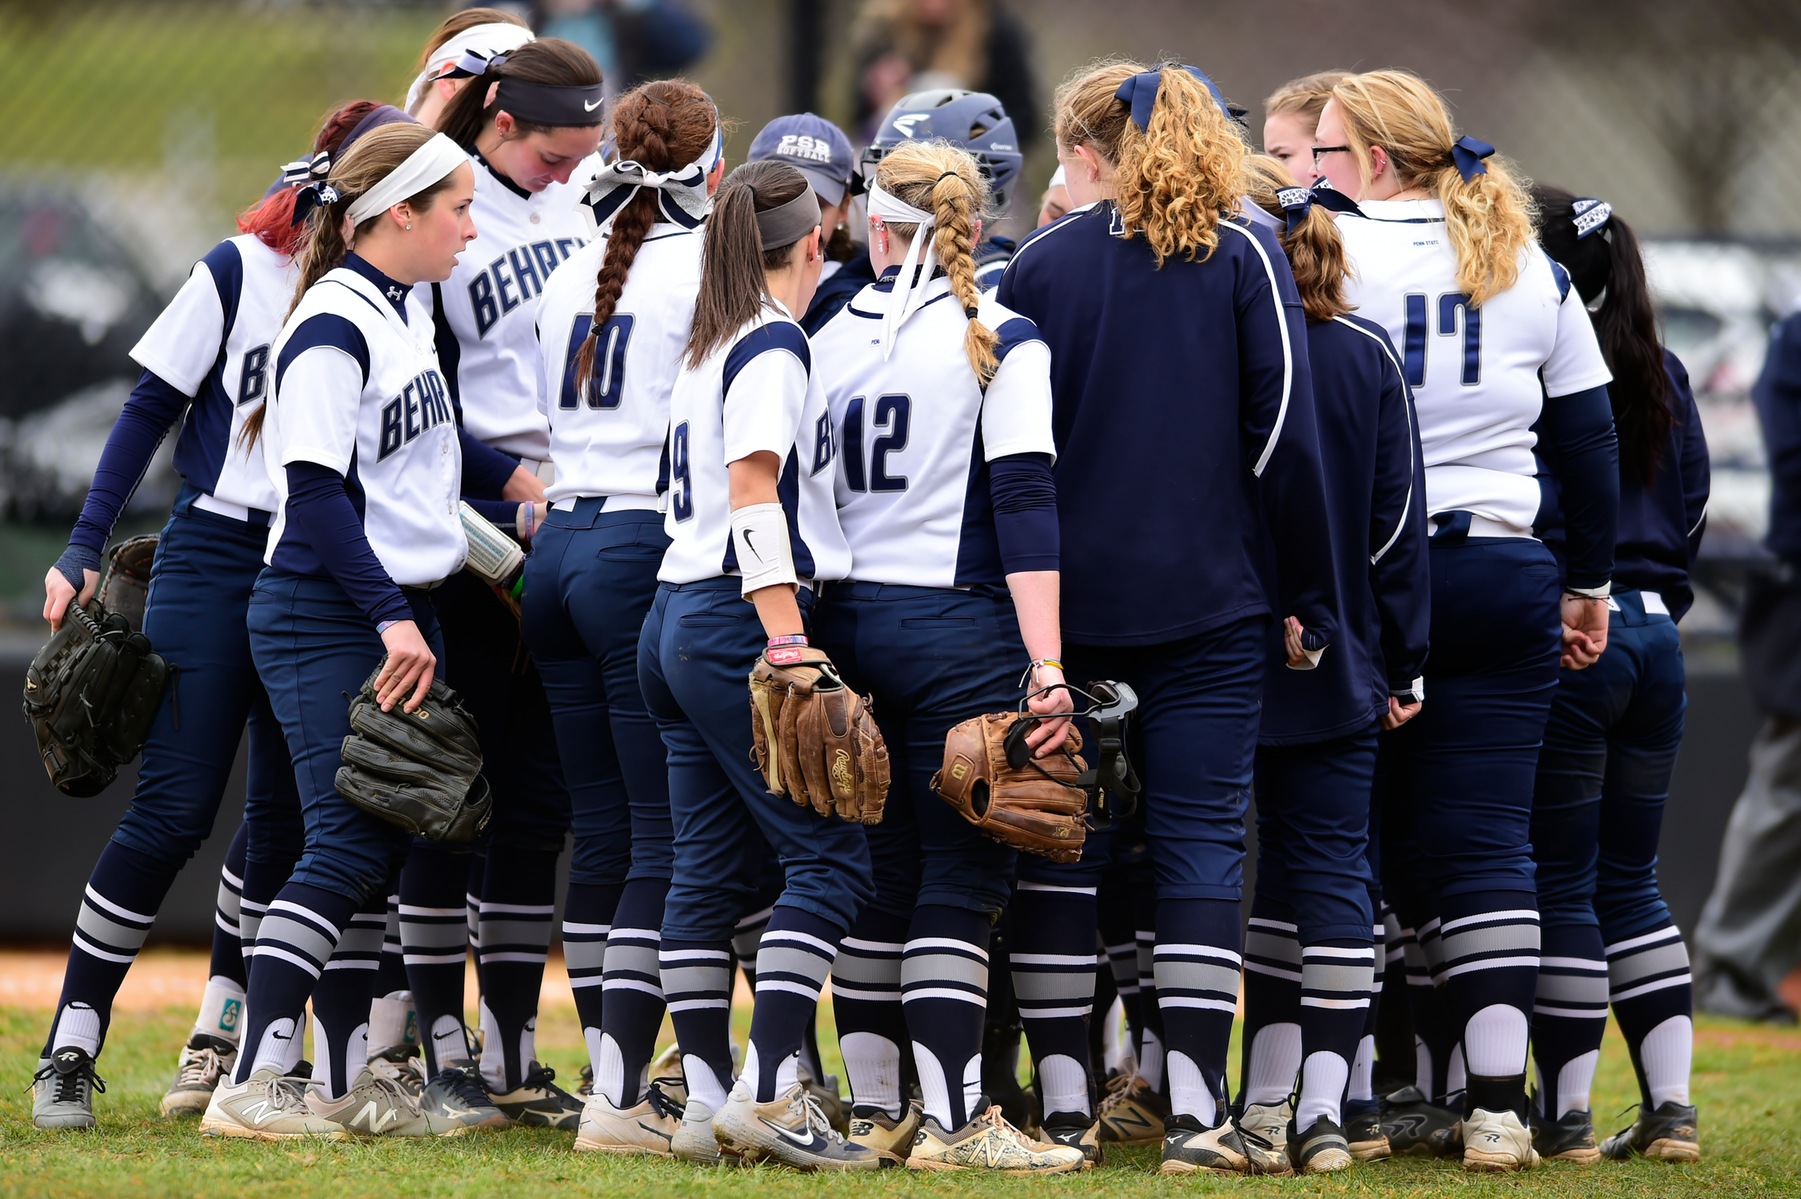 Softball Travels to D'Youville for AMCC Matchup